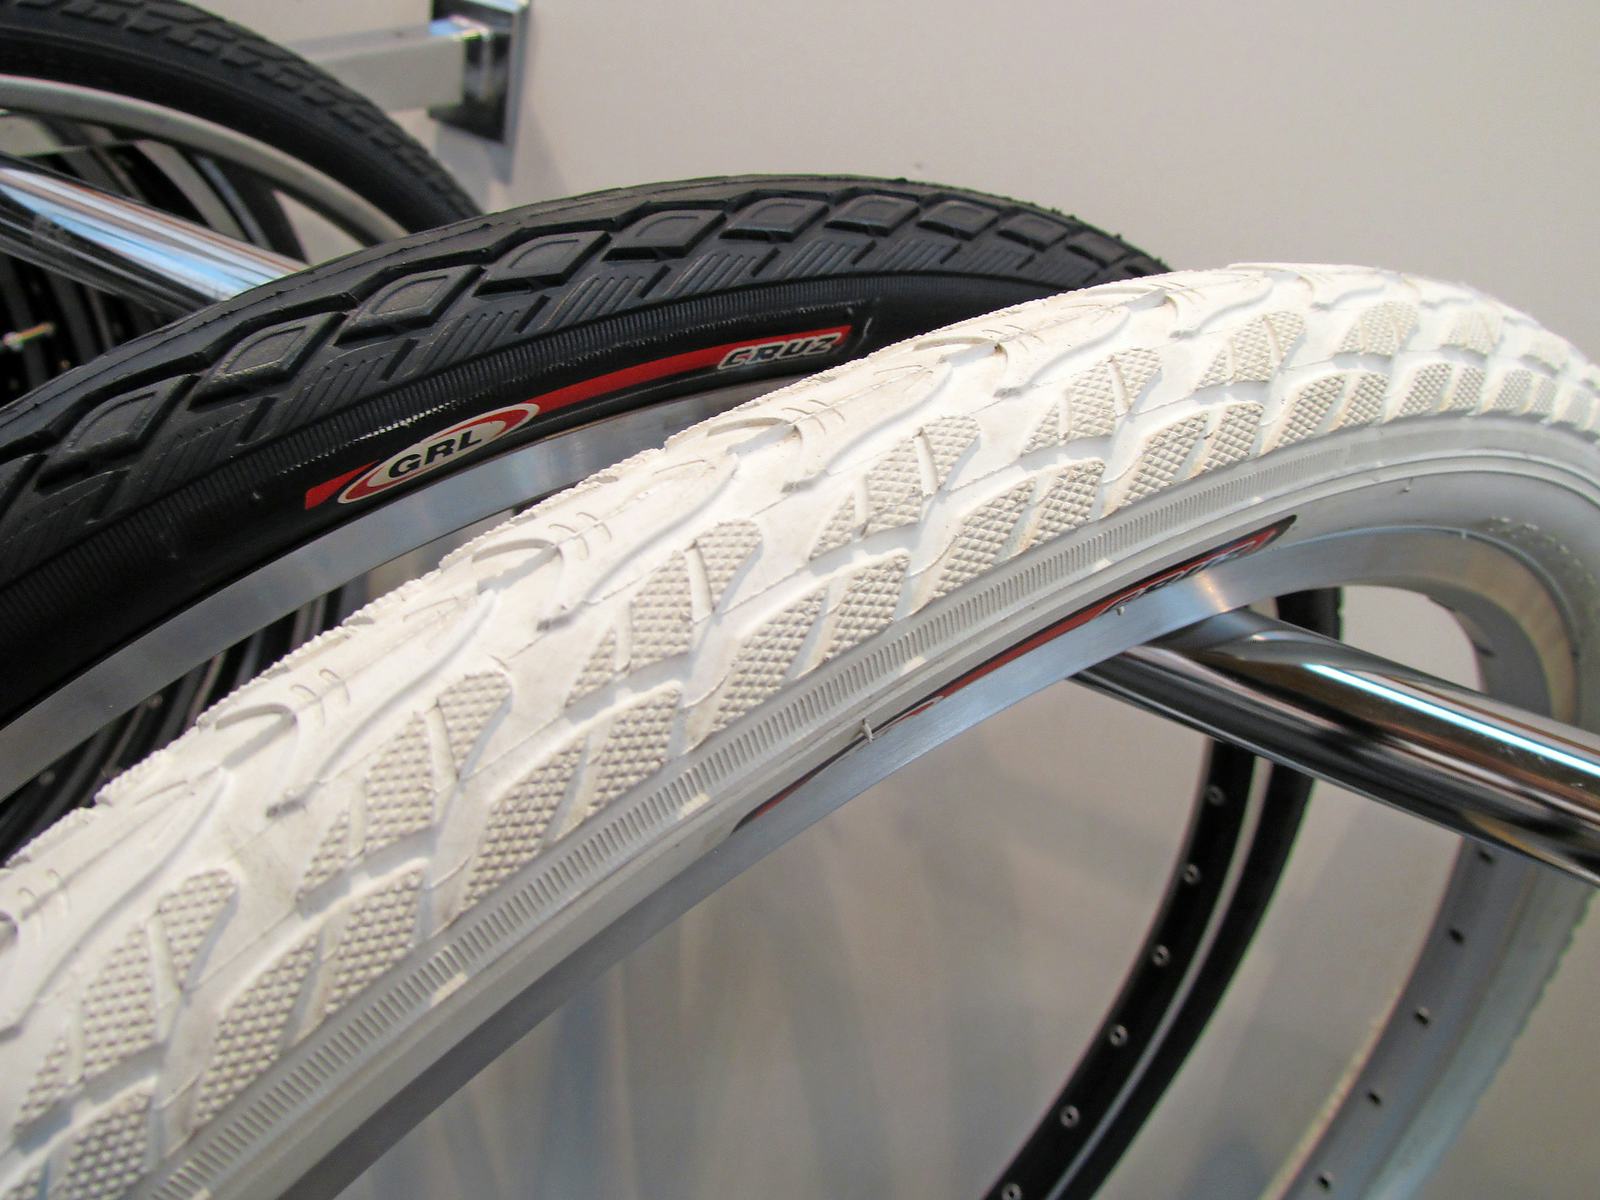 The Govind Rubber line-up also includes Balloon tires as well as multi-color ones. - Photo Bike Europe